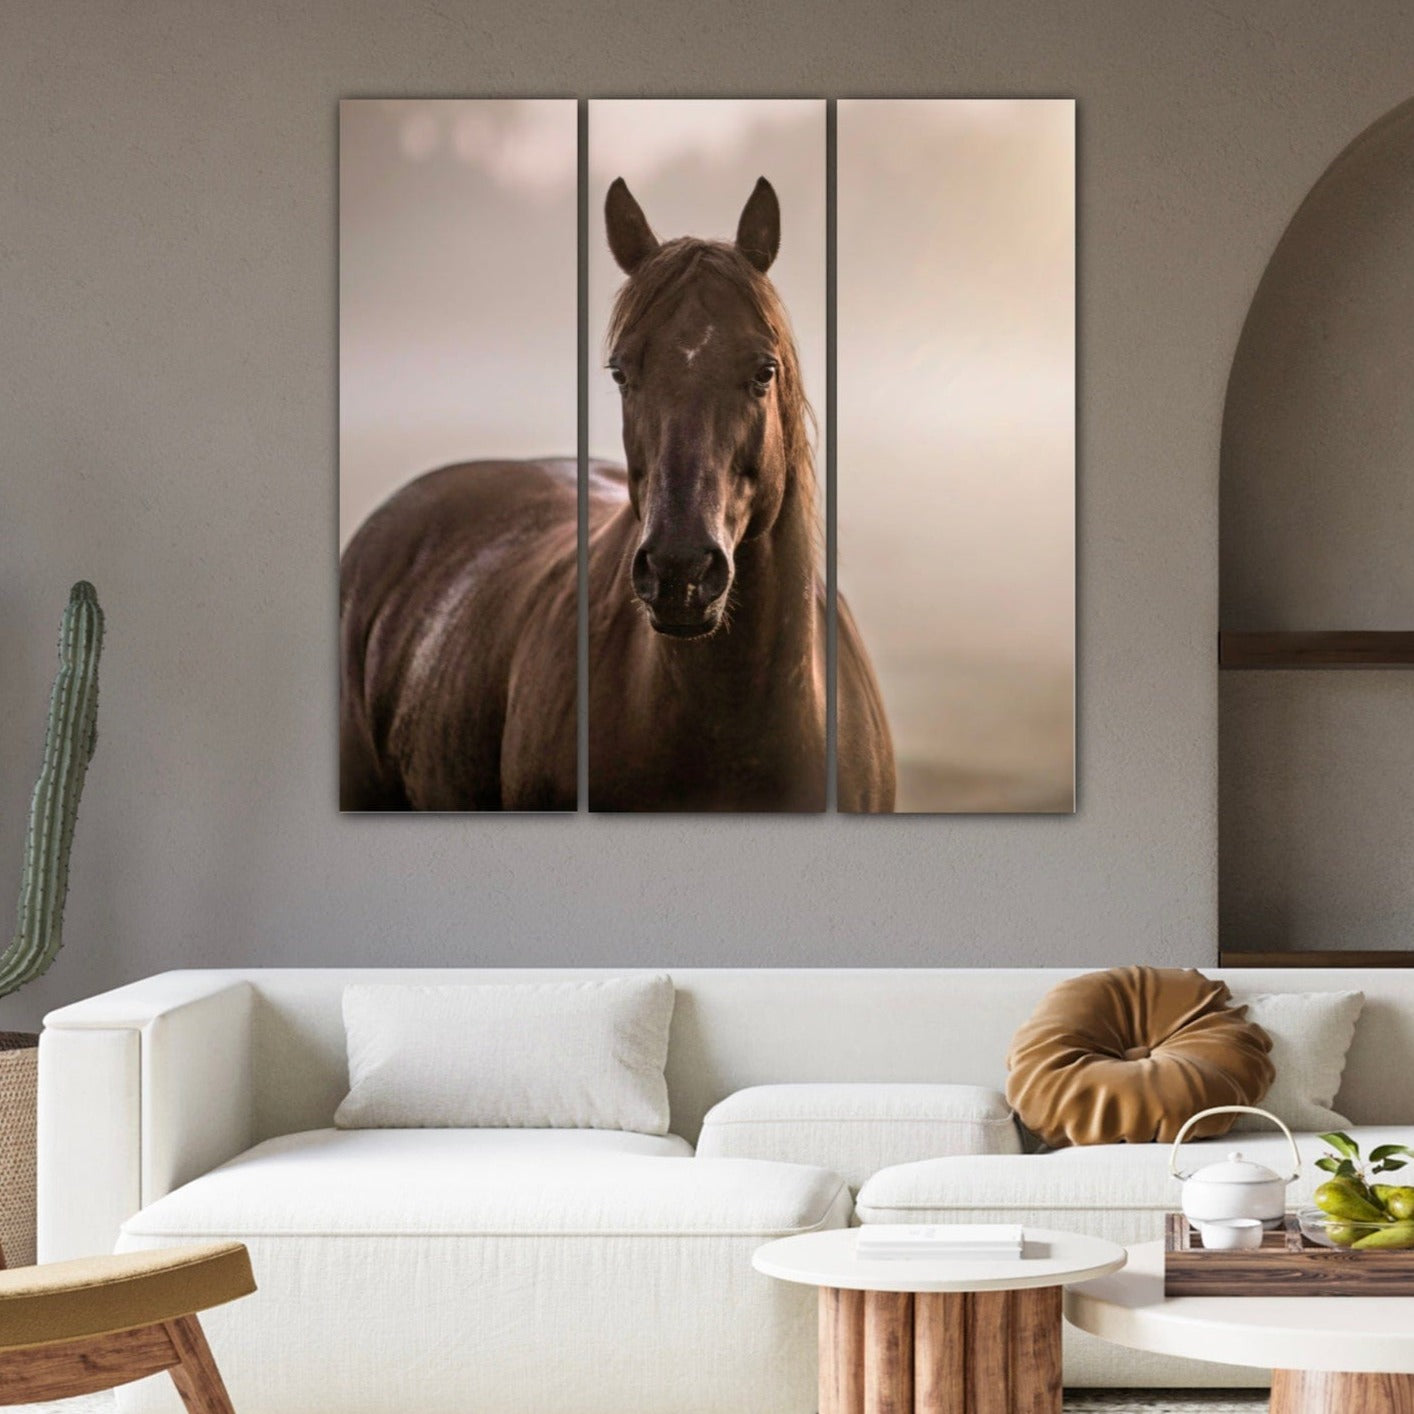 Copy of Horse Art for Large Wall - 3 Piece Canvas Triptych Wall Art Teri James Photography